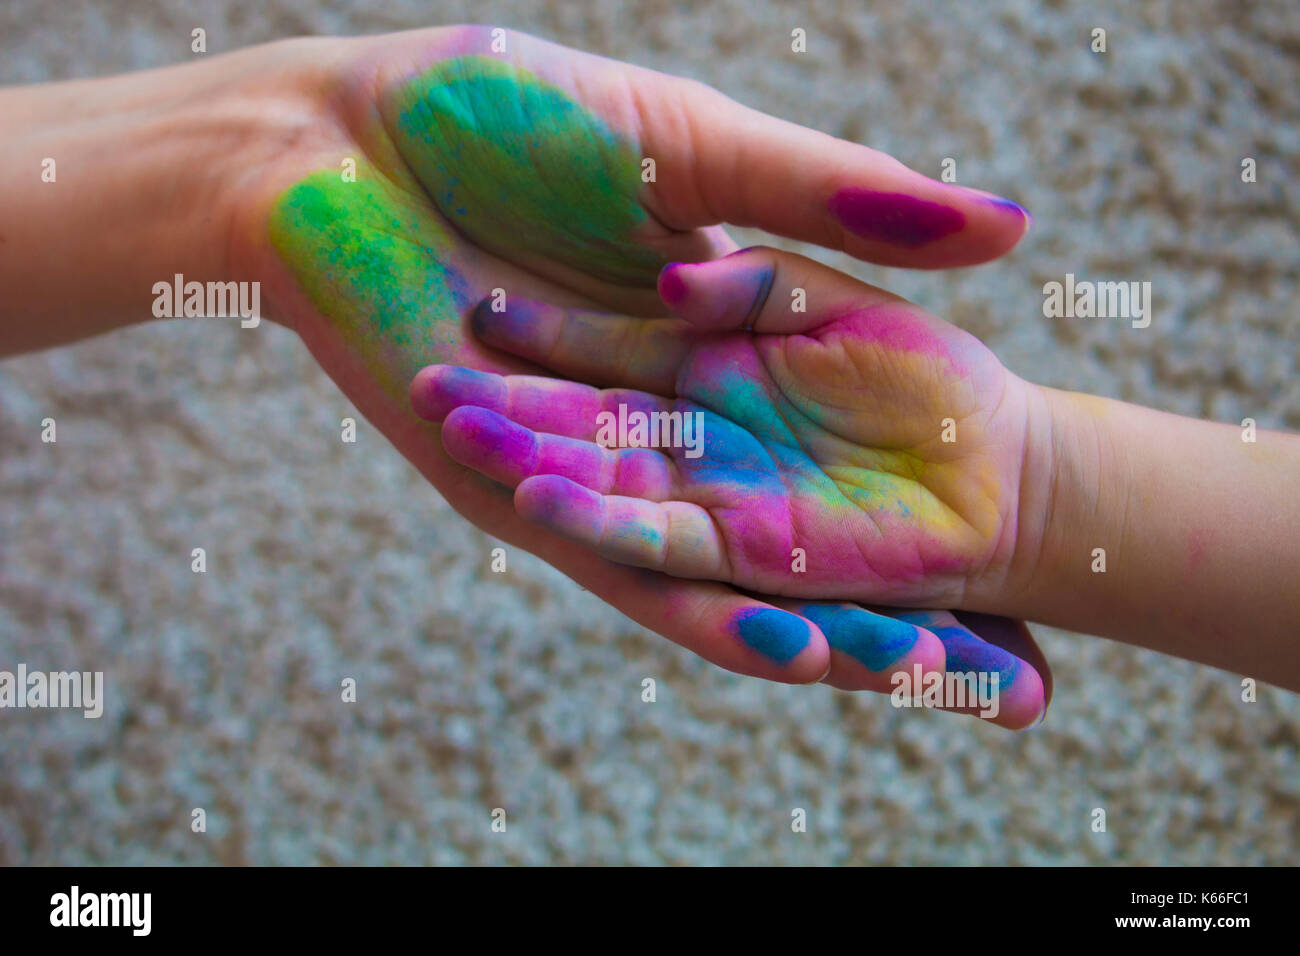 parental hand holds a palm of the baby painted with colored pastels Stock Photo